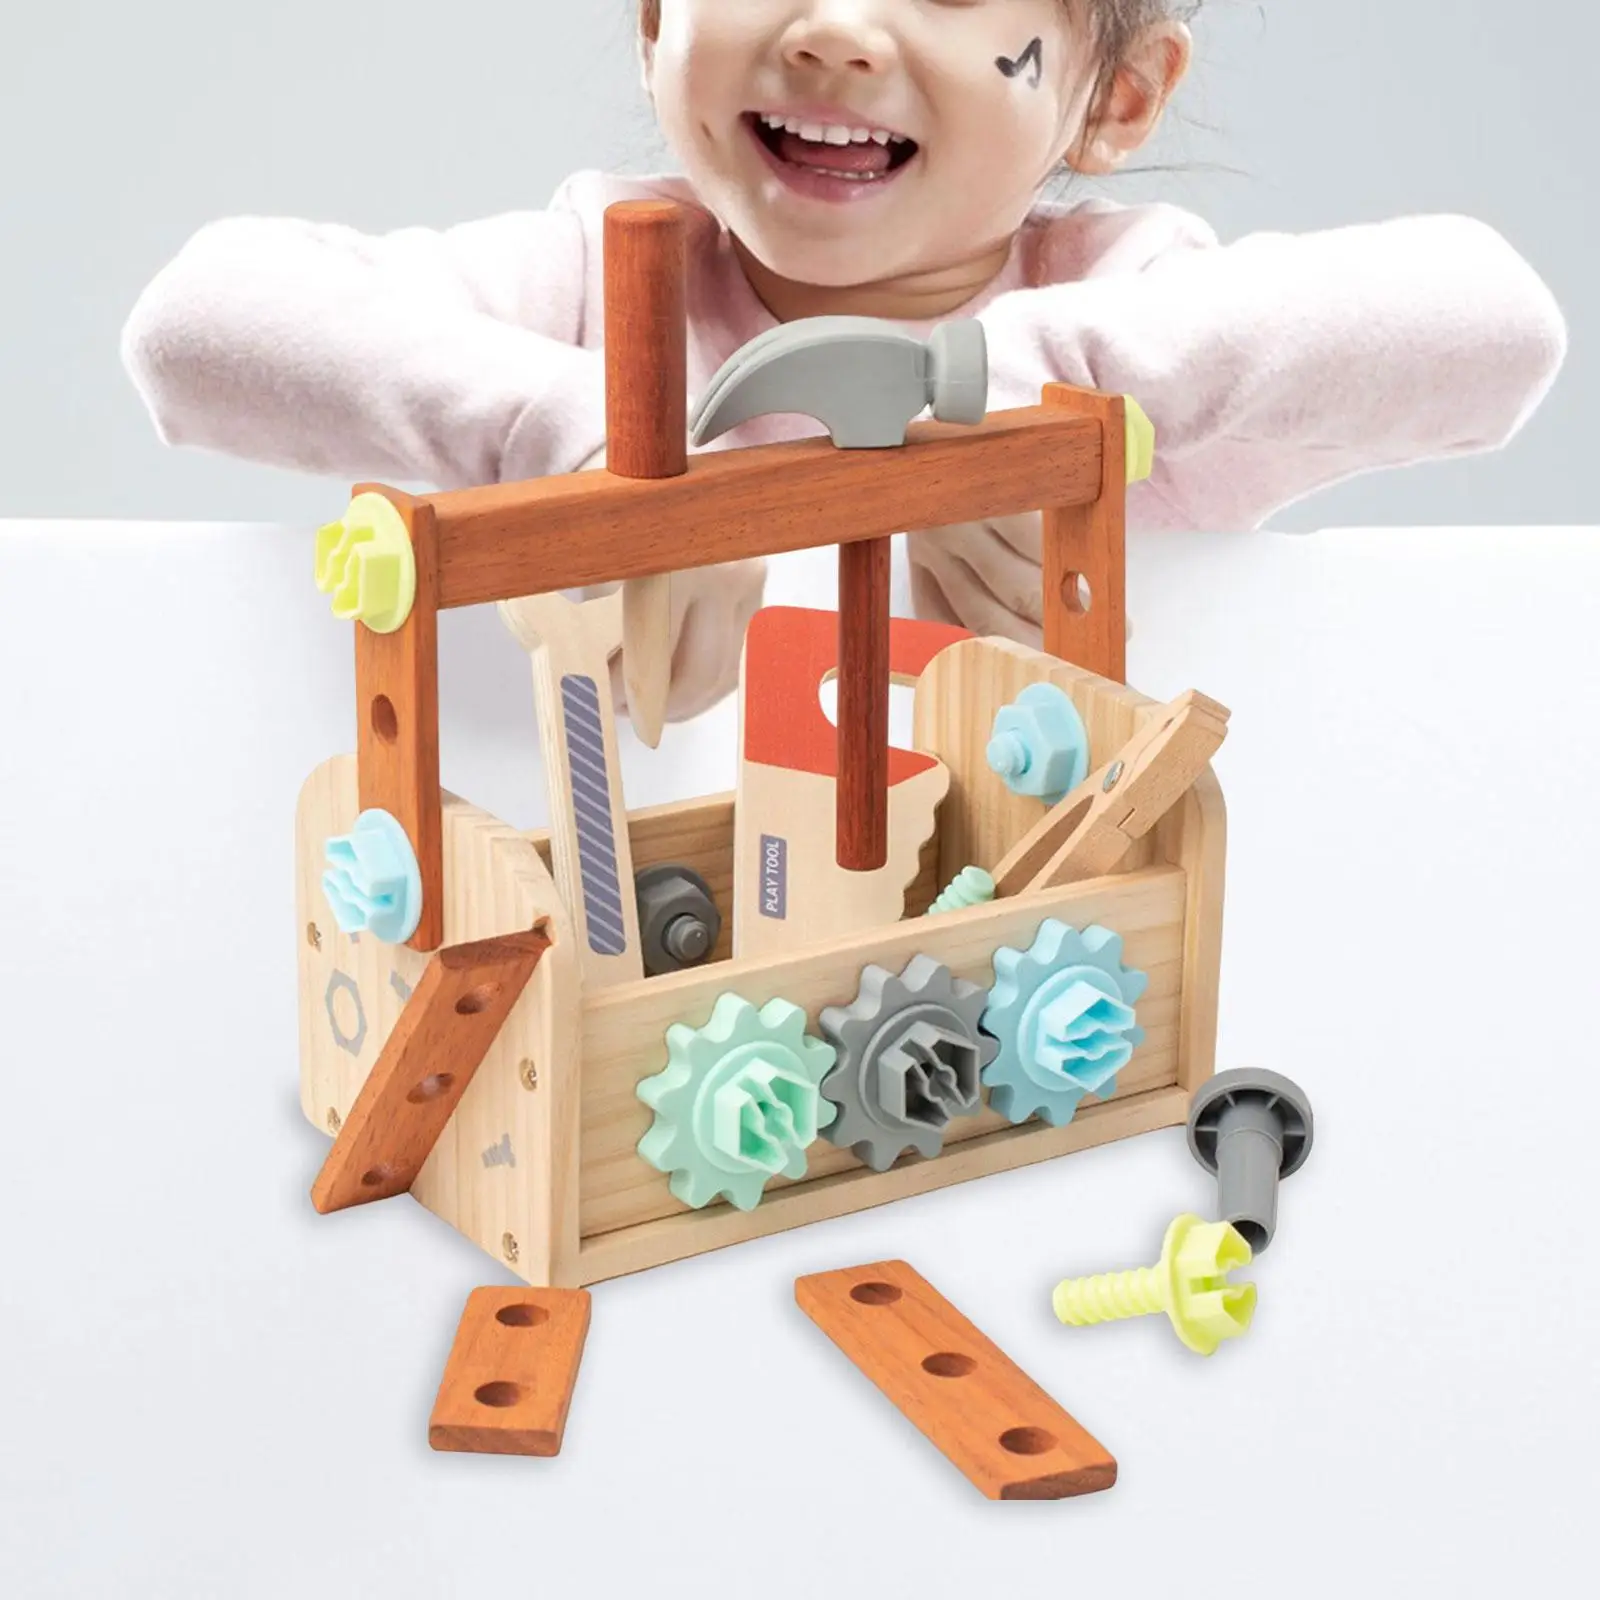 Wooden Kids Tool Set Birthday Gift Montessori Educational Gift Fine Motor Skill Wooden Tool Bench Toy Toolbox Toy for Toddlers